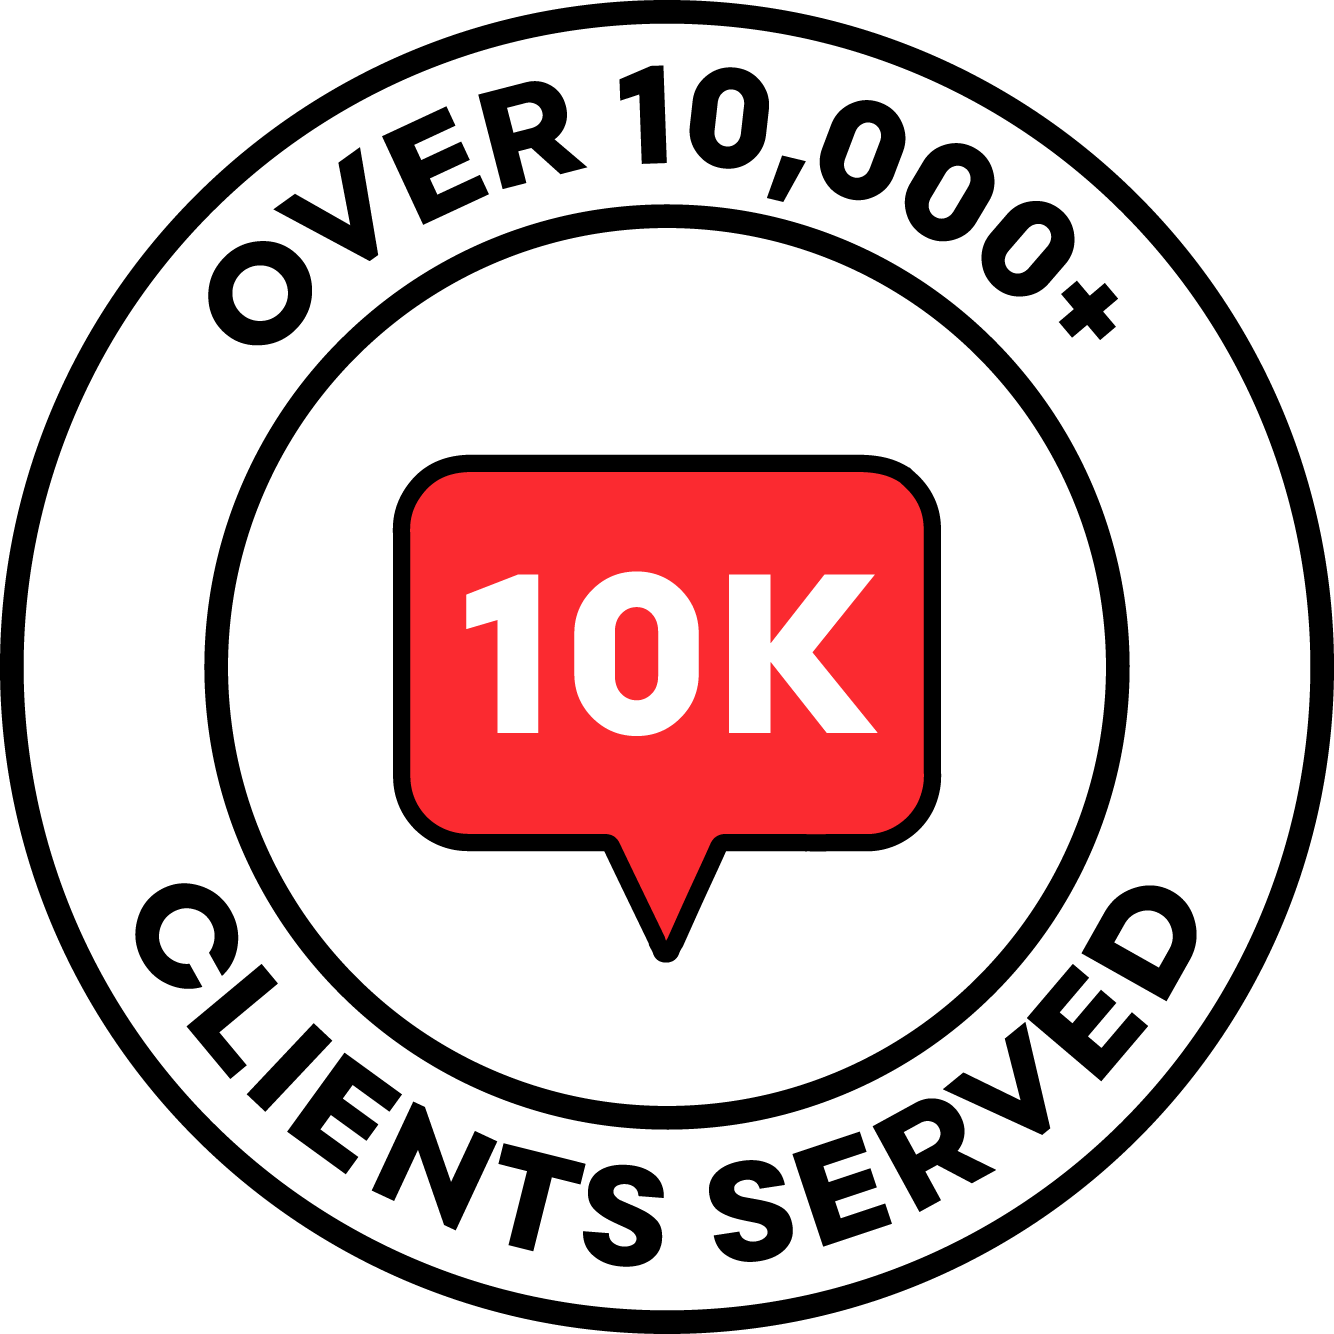 10k (2).png